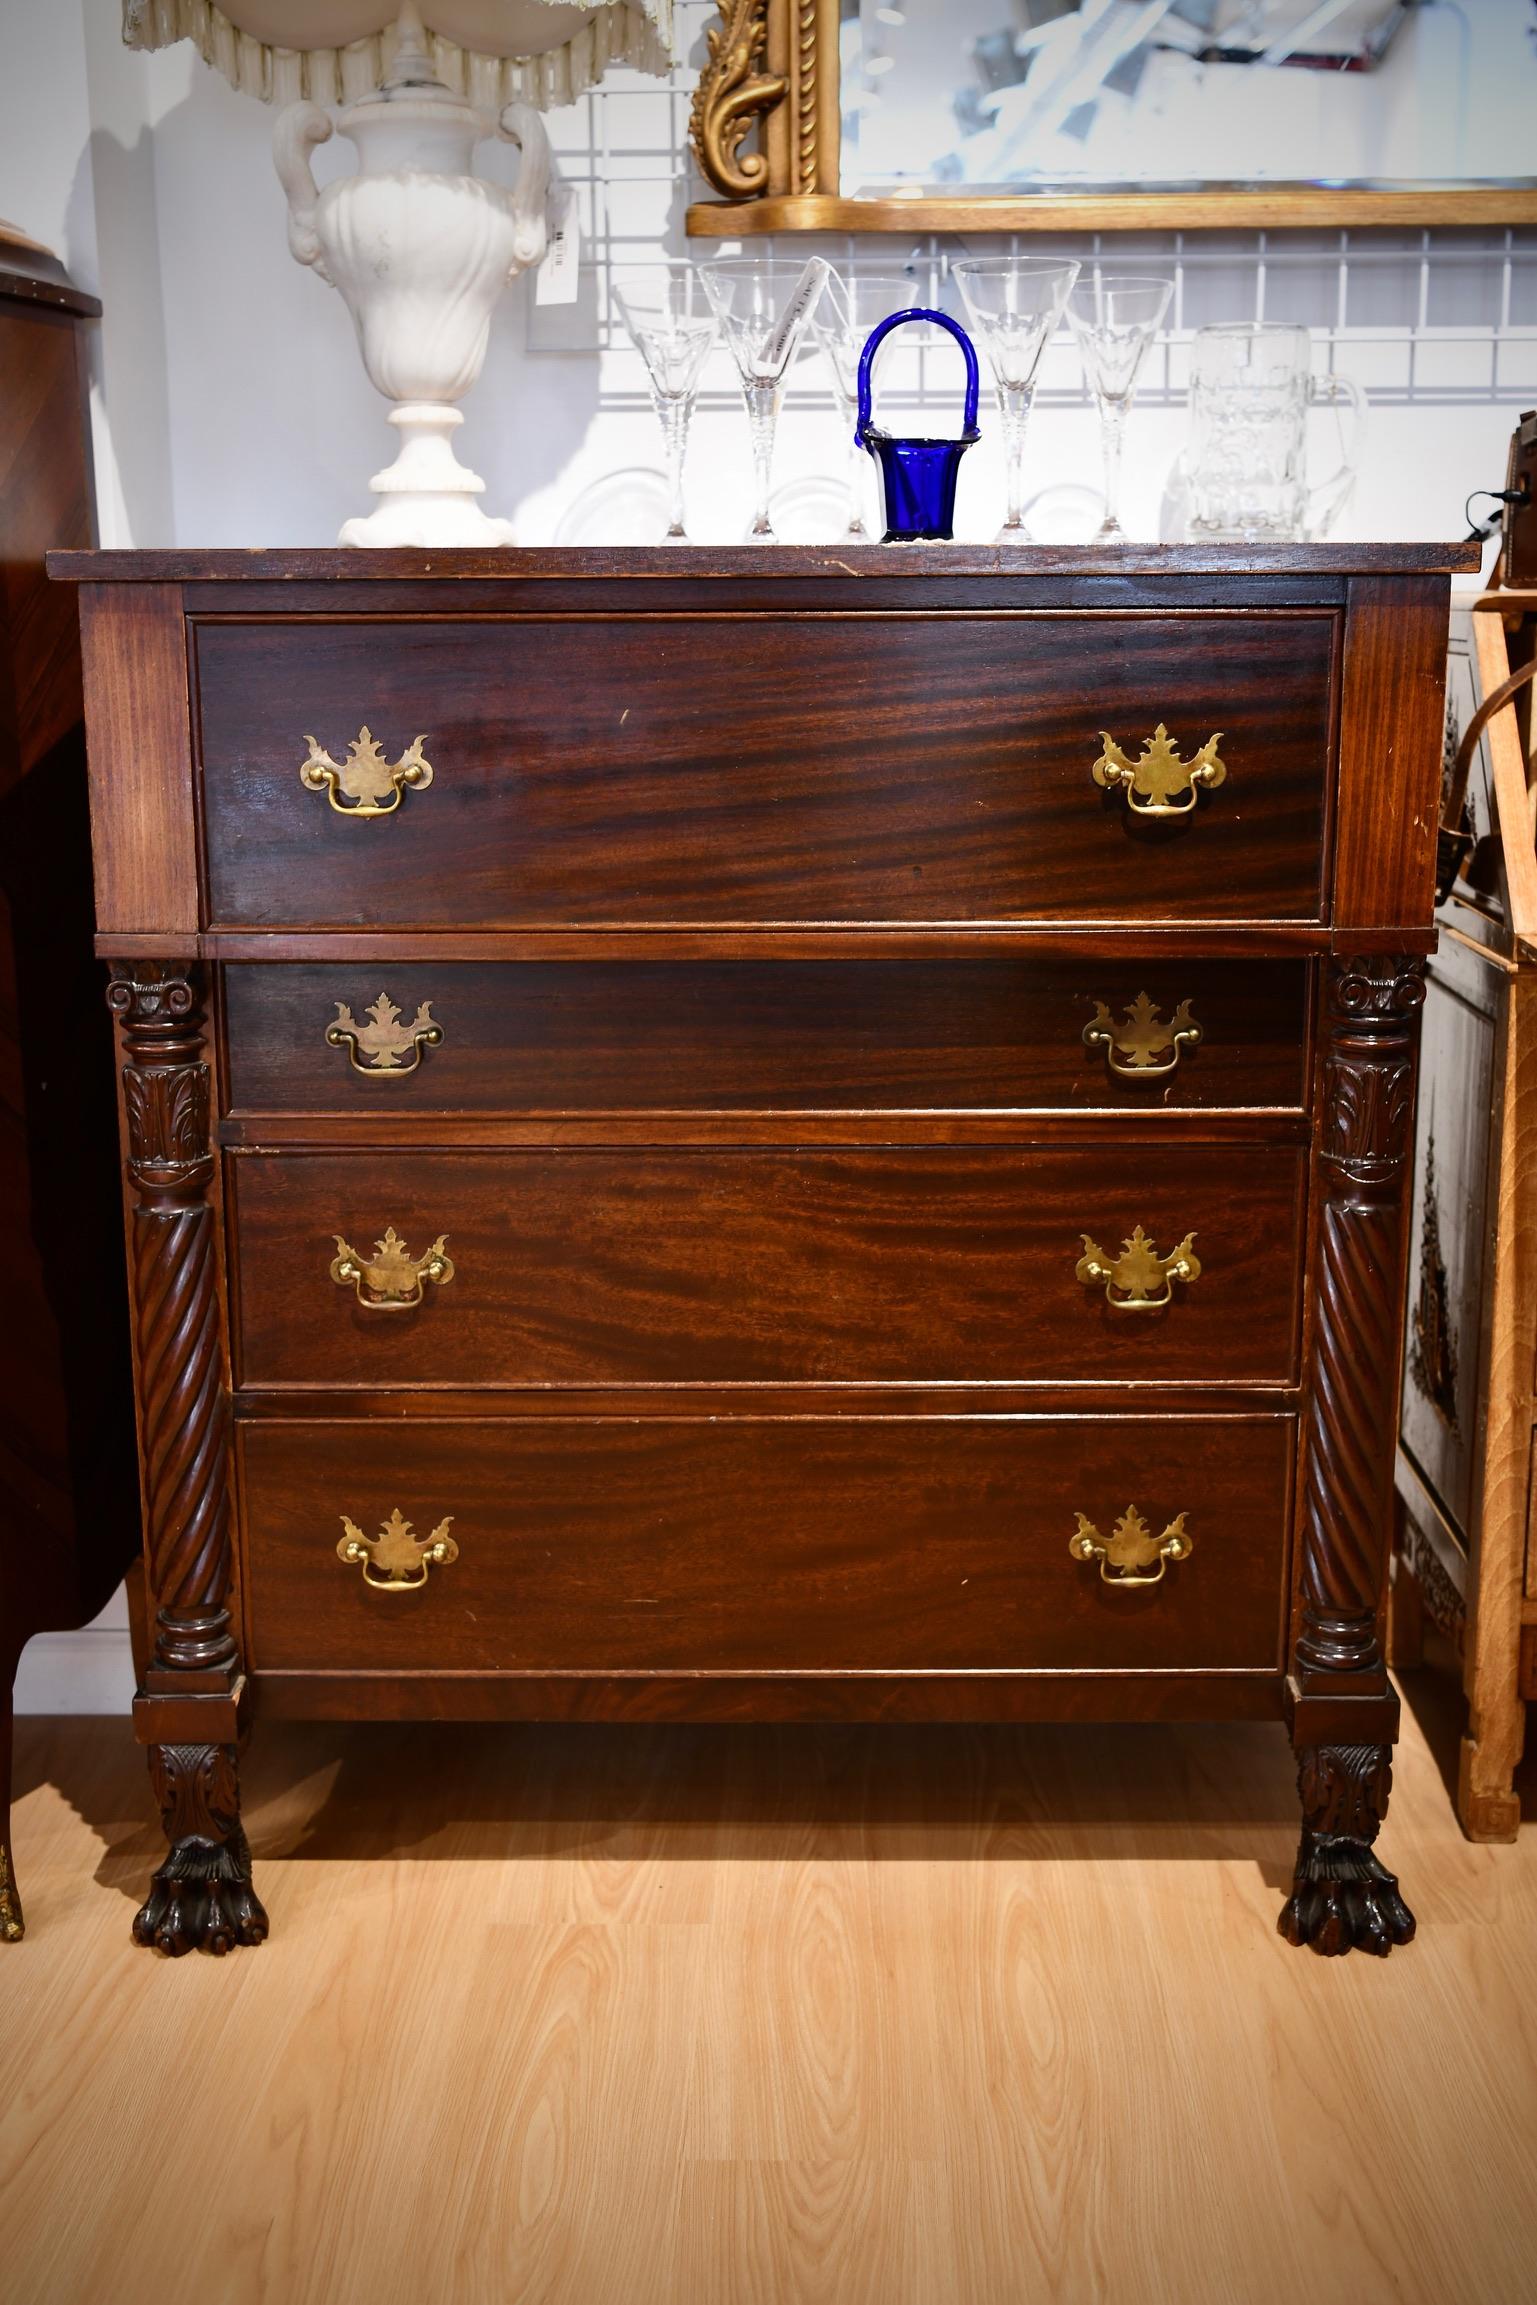 Antique American empire bachelor's chest of drawers. Top drawer folds down to become a desk. Dimensions: 43.5